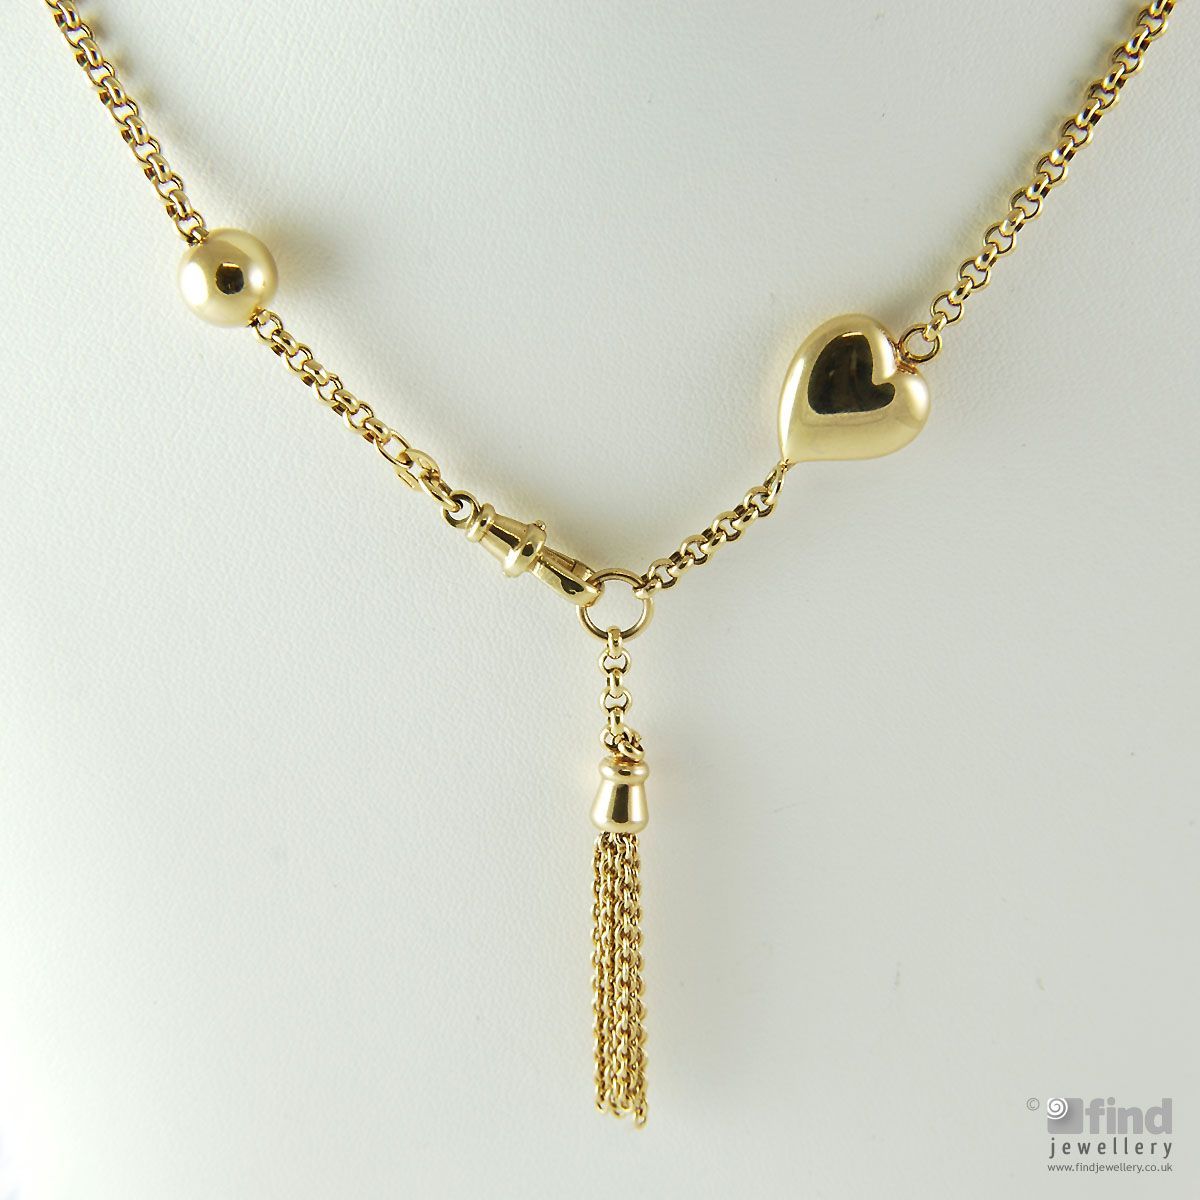 Heart and Ball 9ct Gold Tassle Necklace